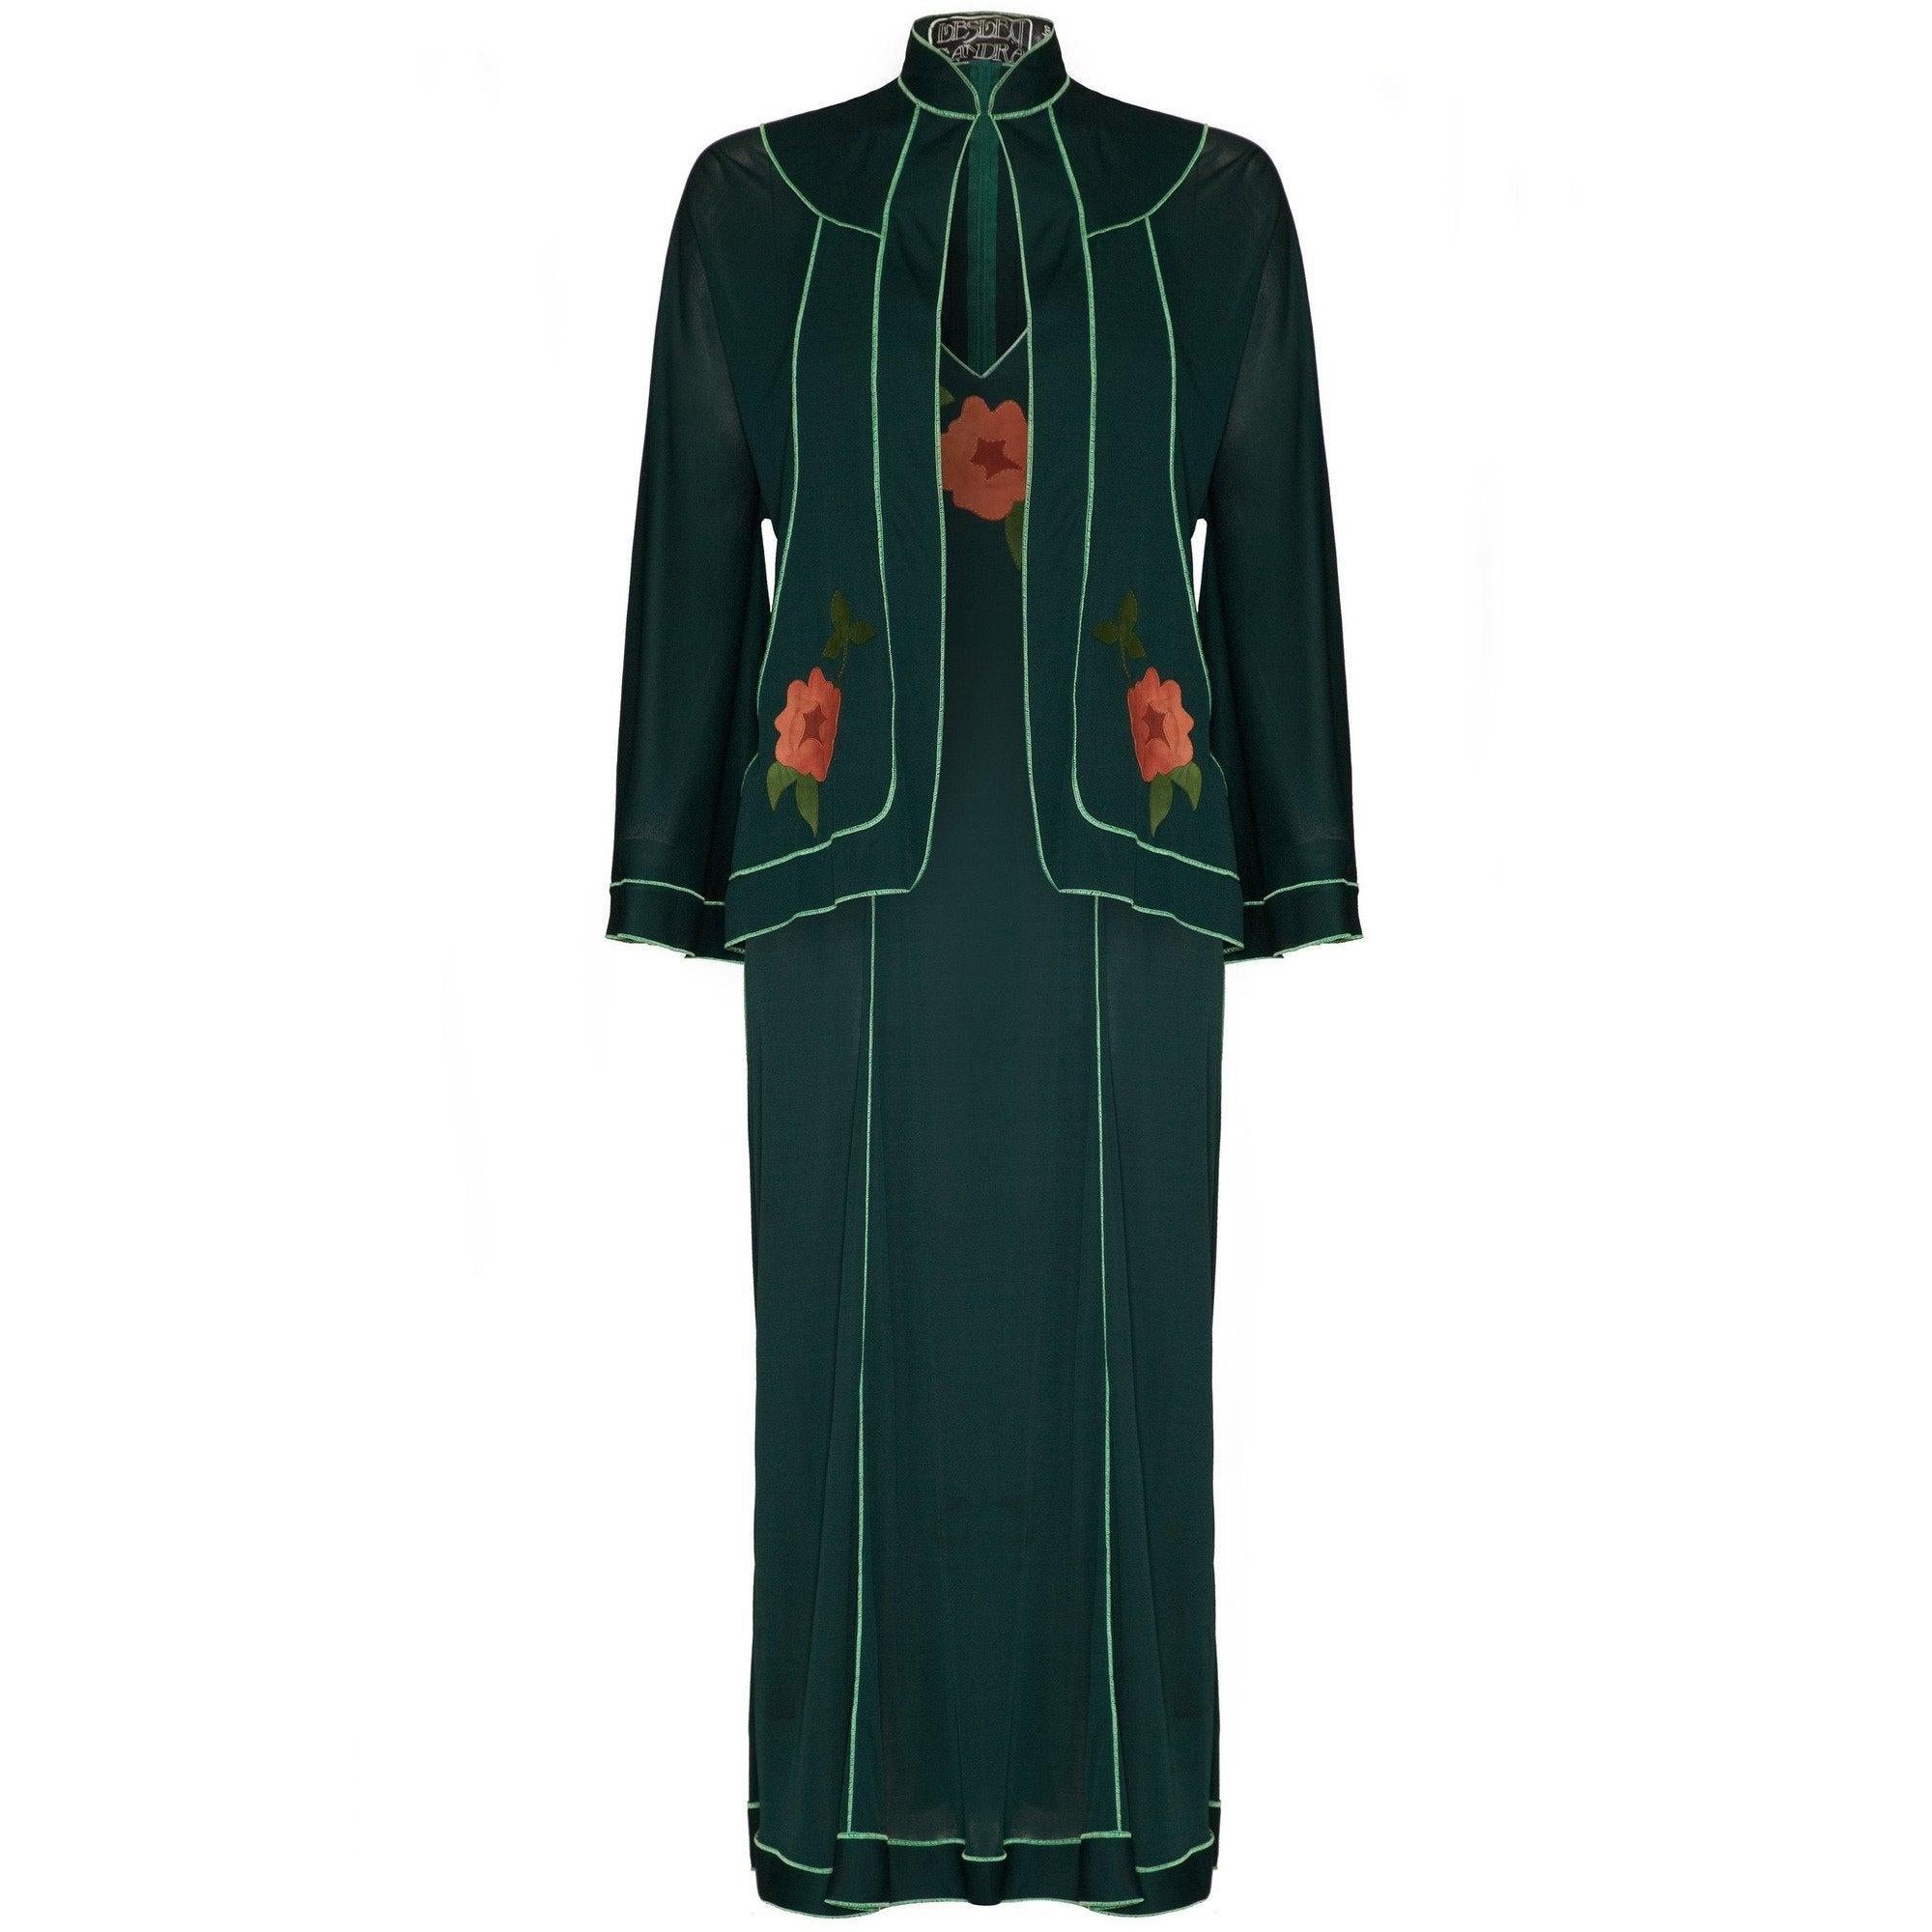 This bewitching 1970s ensemble in moss green jersey by British designer Lesley Sandra who's elegant, feminine designs were hugely popular with stockists such as Selfriges and Harvey Nichols during this era. This decorative set features pale green